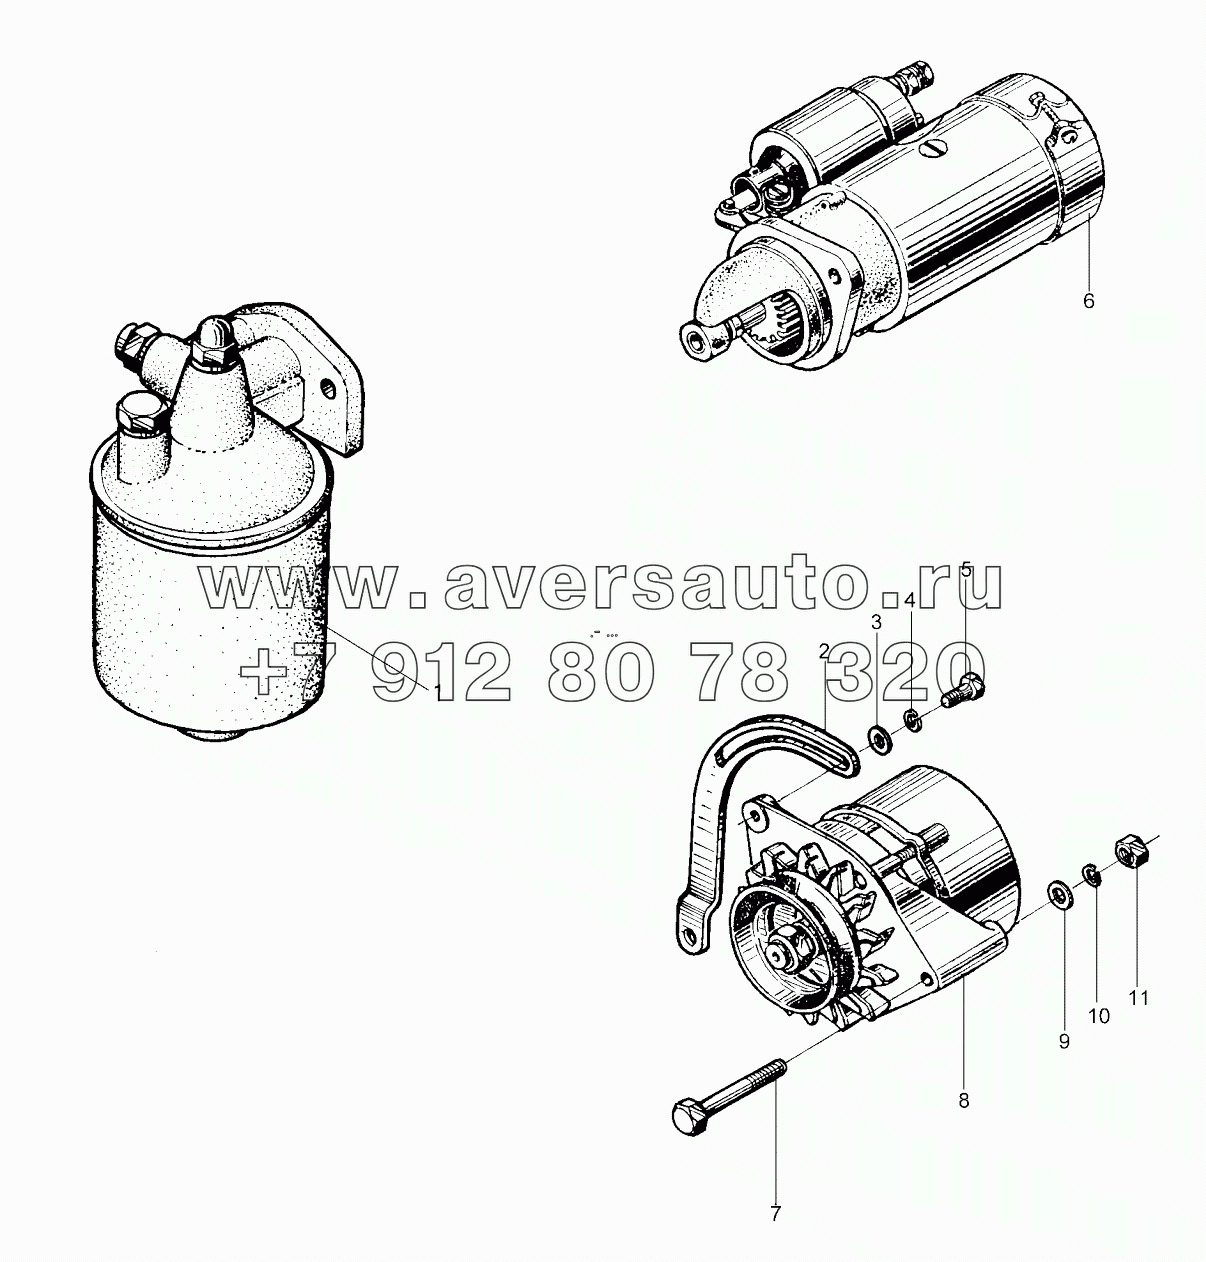  Oil filter, starting motor and charging generator assembly